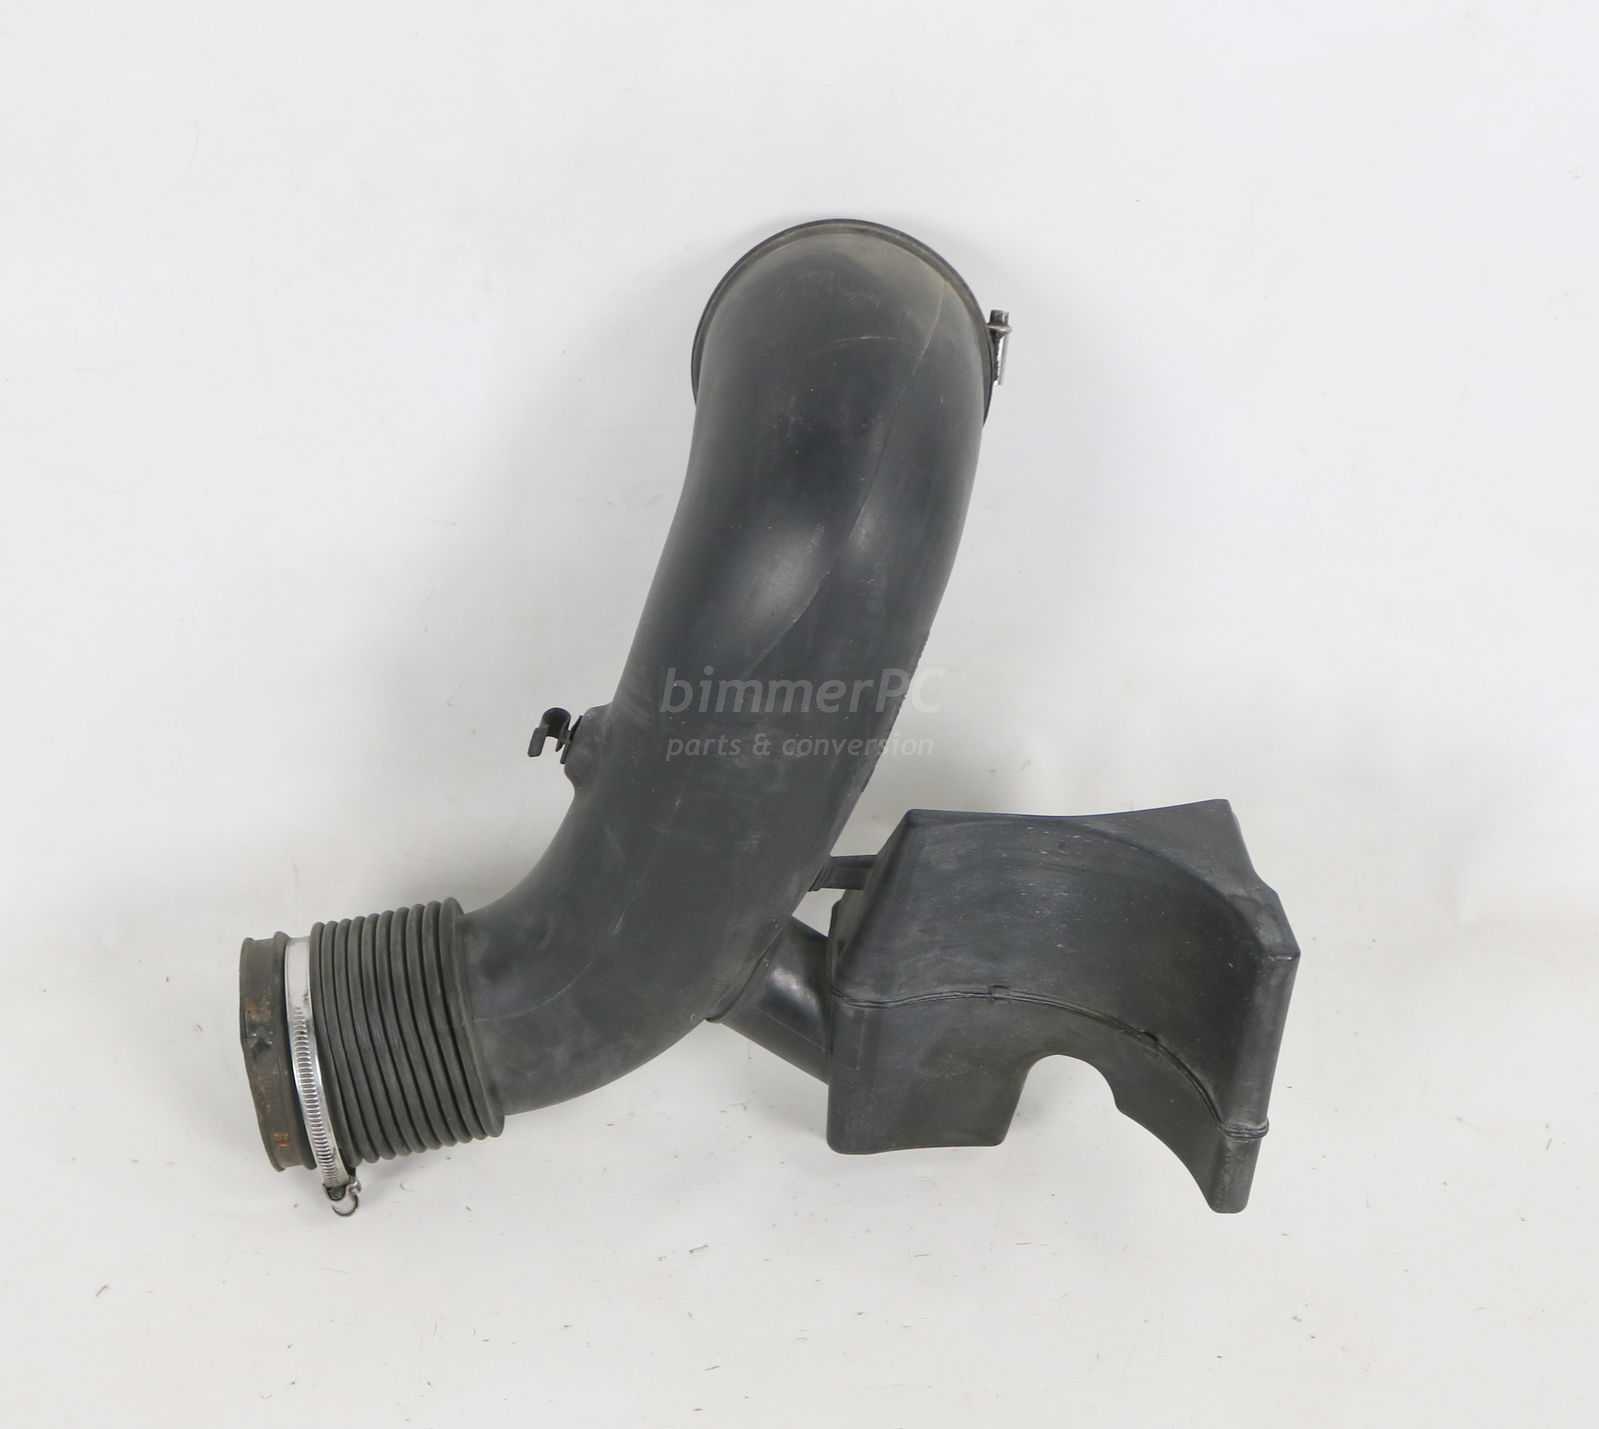 Primary image for BMW E53 X5 3.0i Air Intake Duct Tube Rubber Boot Top Half M54 6cyl 2000-2006 OEM